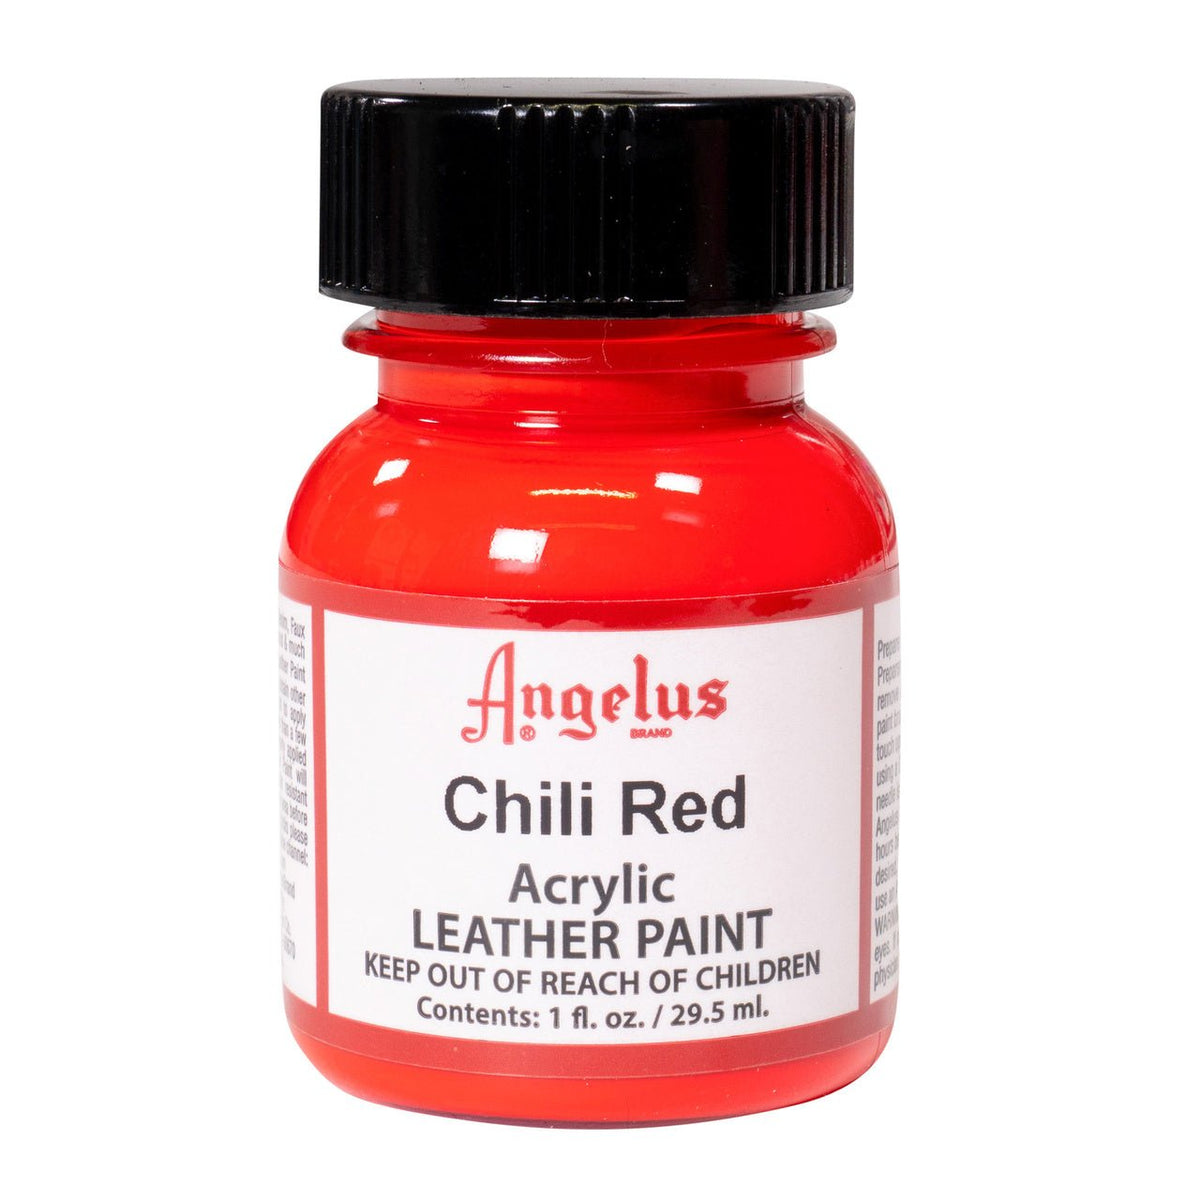 Angelus Acrylic Leather Paint - 1 oz. Bottle - Chili Red - merriartist.com